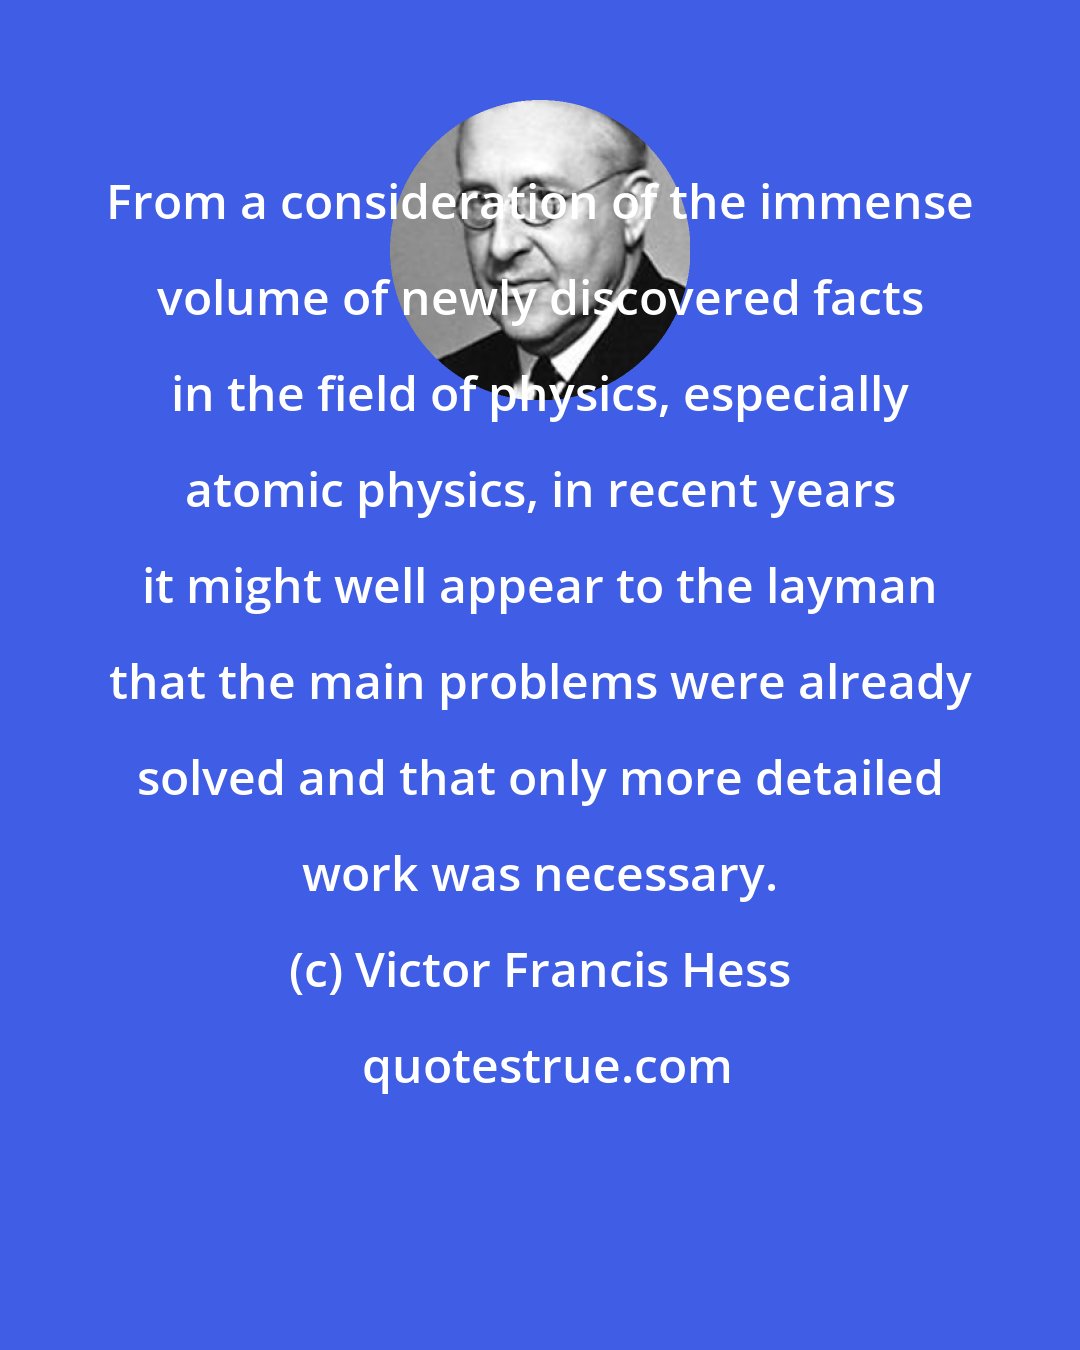 Victor Francis Hess: From a consideration of the immense volume of newly discovered facts in the field of physics, especially atomic physics, in recent years it might well appear to the layman that the main problems were already solved and that only more detailed work was necessary.